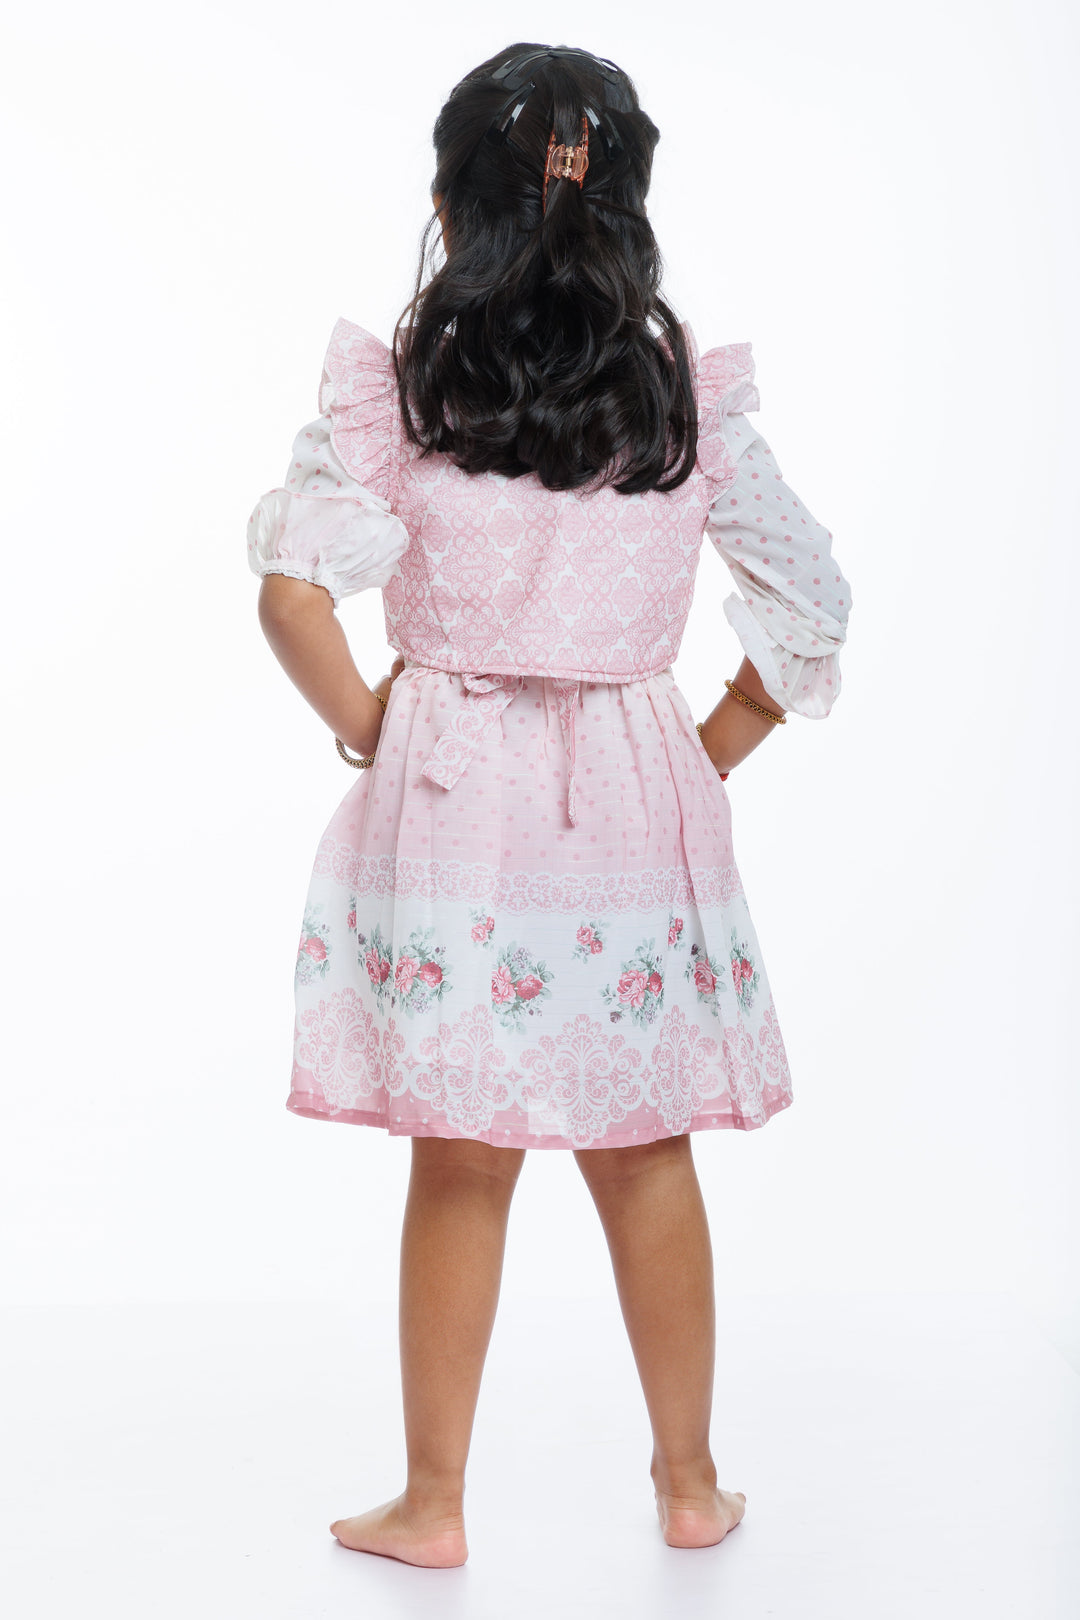 The Nesavu Girls Fancy Frock Girls Pink Fancy Frock with Lace Detailing and Matching Sheer Jacket Nesavu Buy Girls Pink Lace Fancy Frock with Sheer Jacket | Perfect Party Dress | The Nesavu